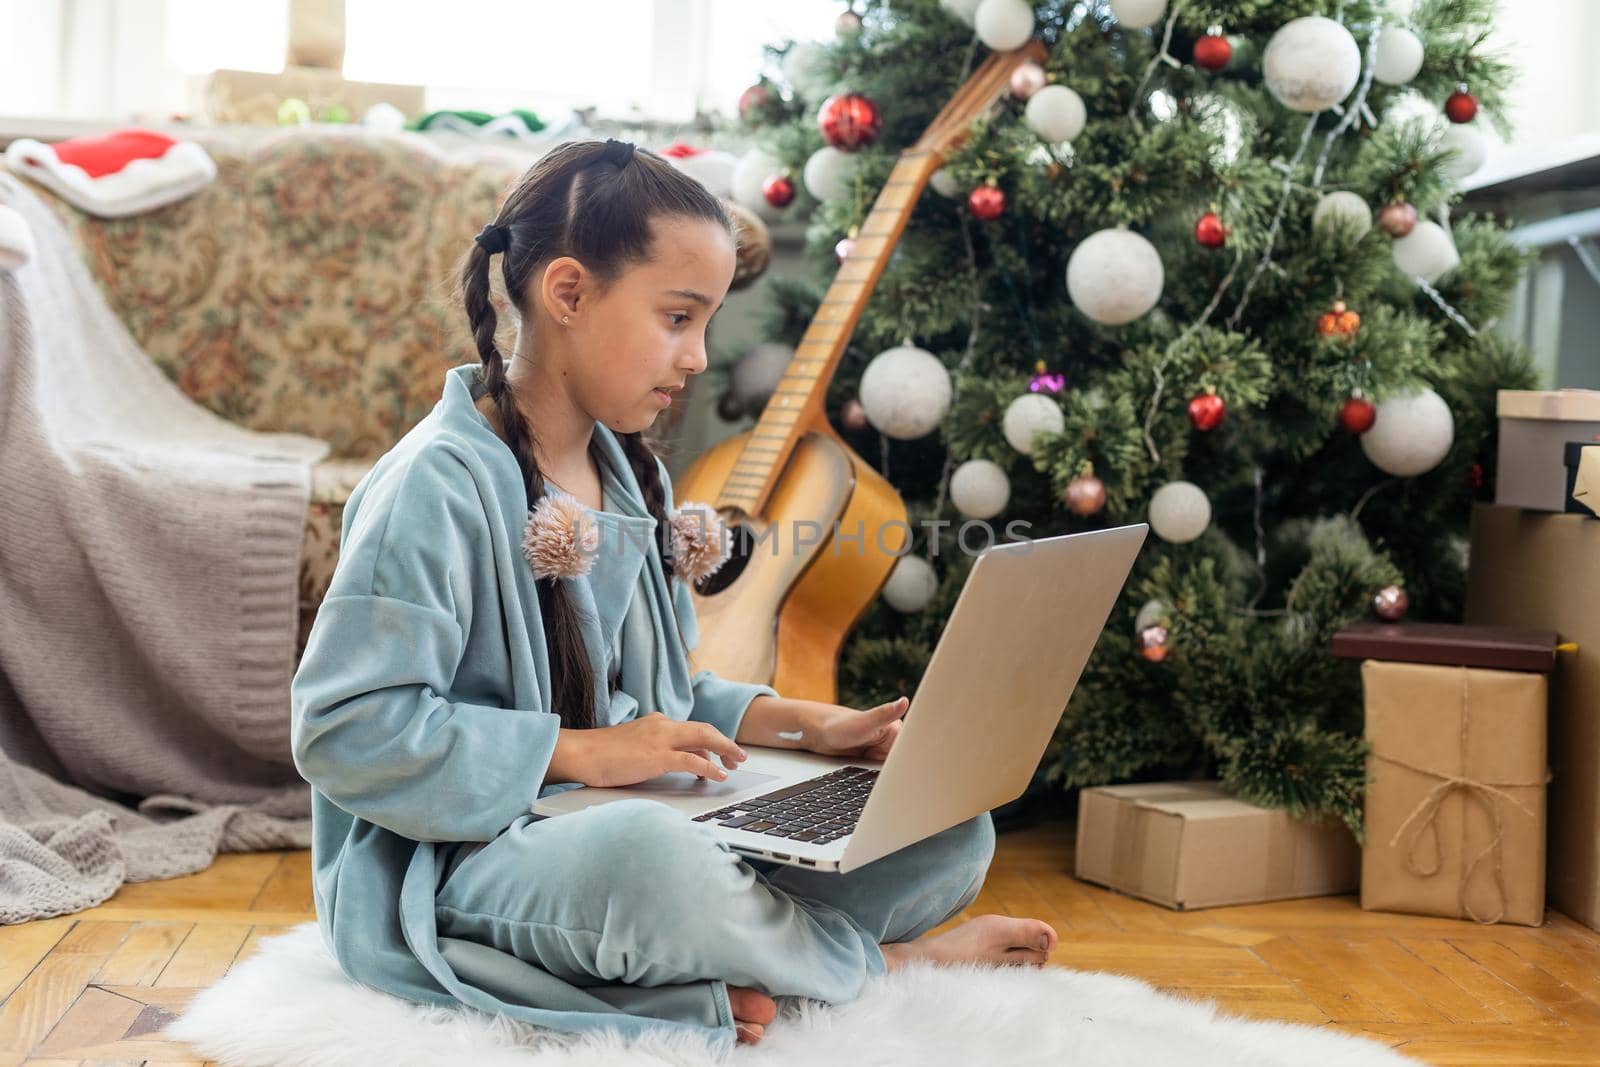 little girl sitting, looking at a laptop with a smile before Christmas.